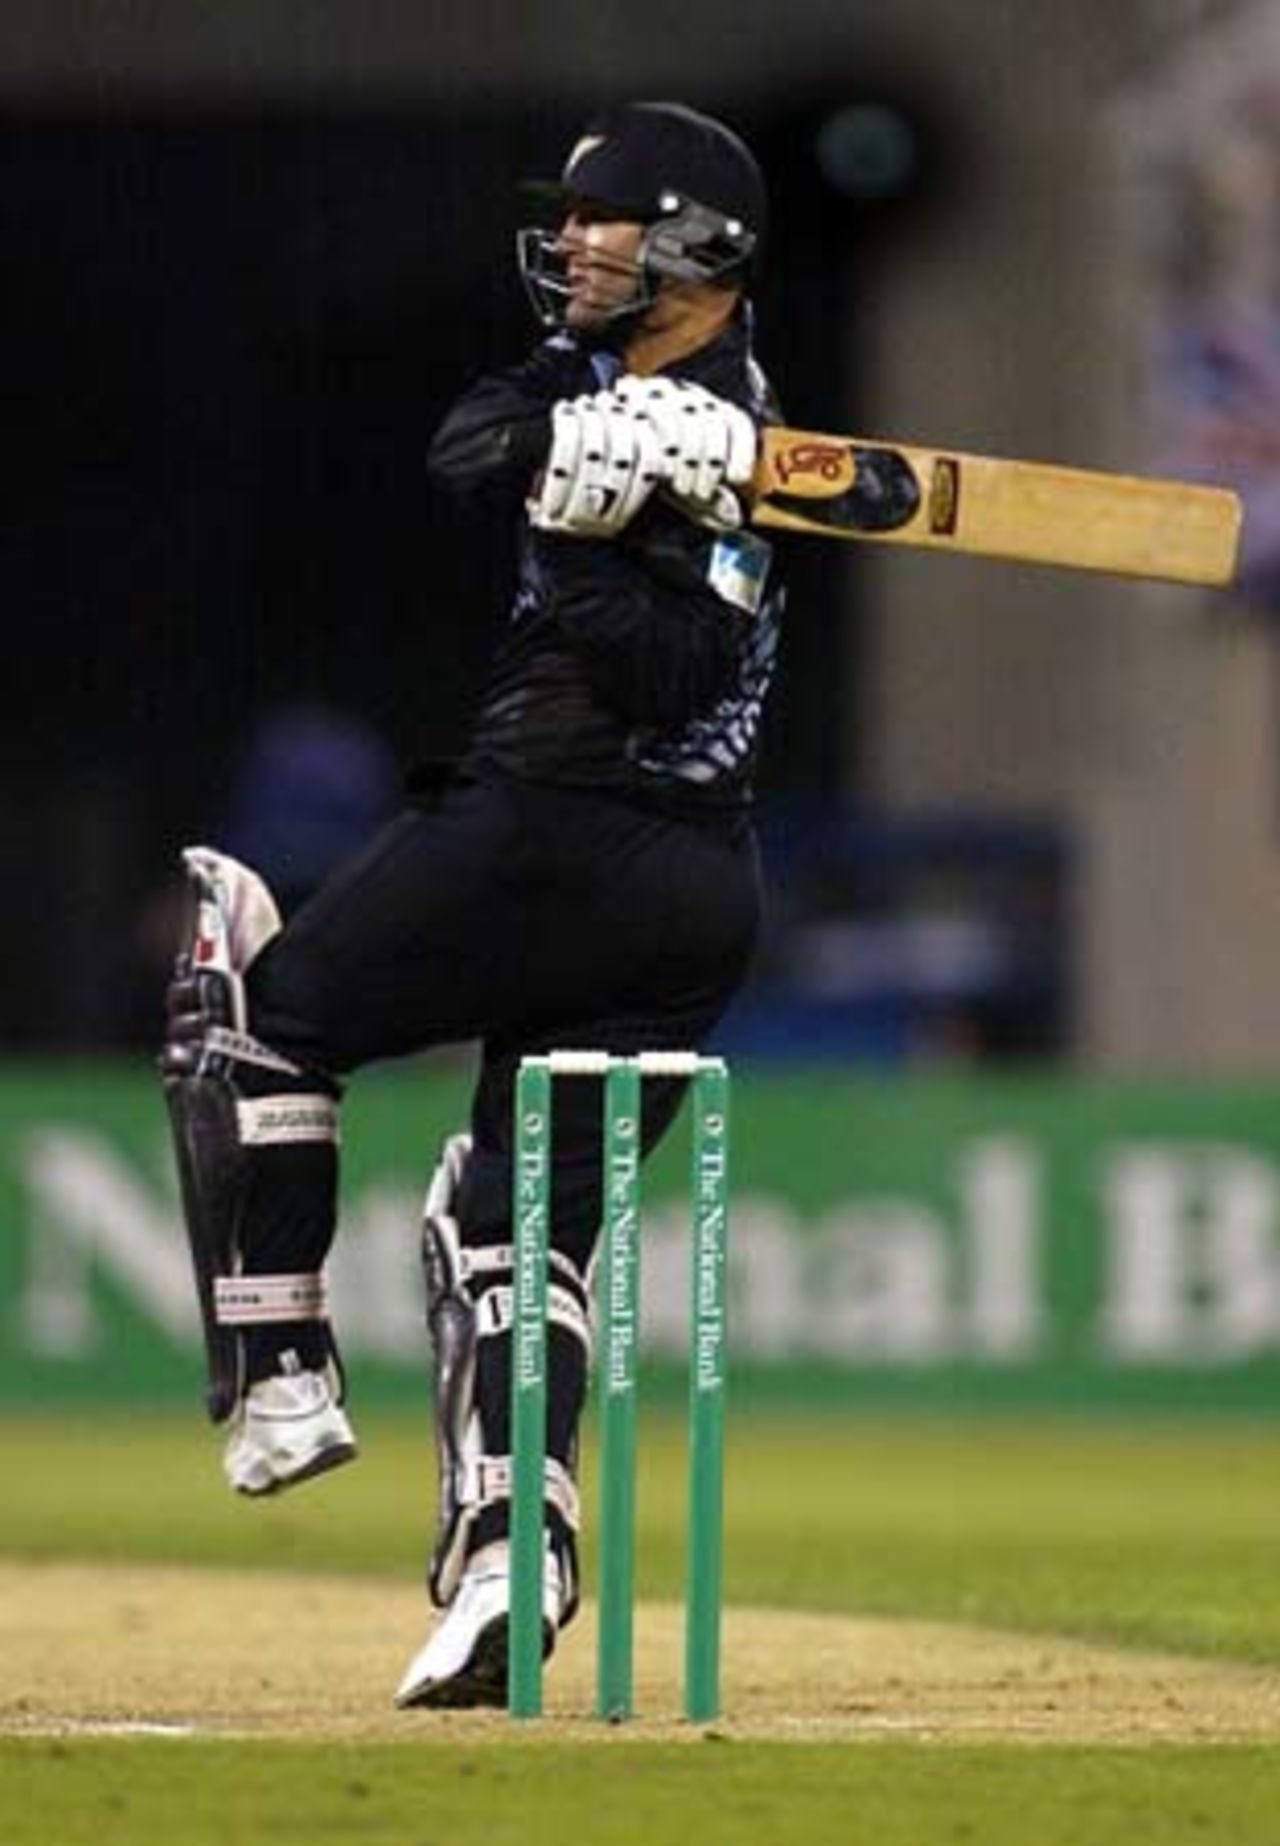 New Zealand batsman Nathan Astle pulls a delivery to the square leg boundary during his innings of 67 not out. 1st ODI: New Zealand v England at Jade Stadium, Christchurch, 13 February 2002.